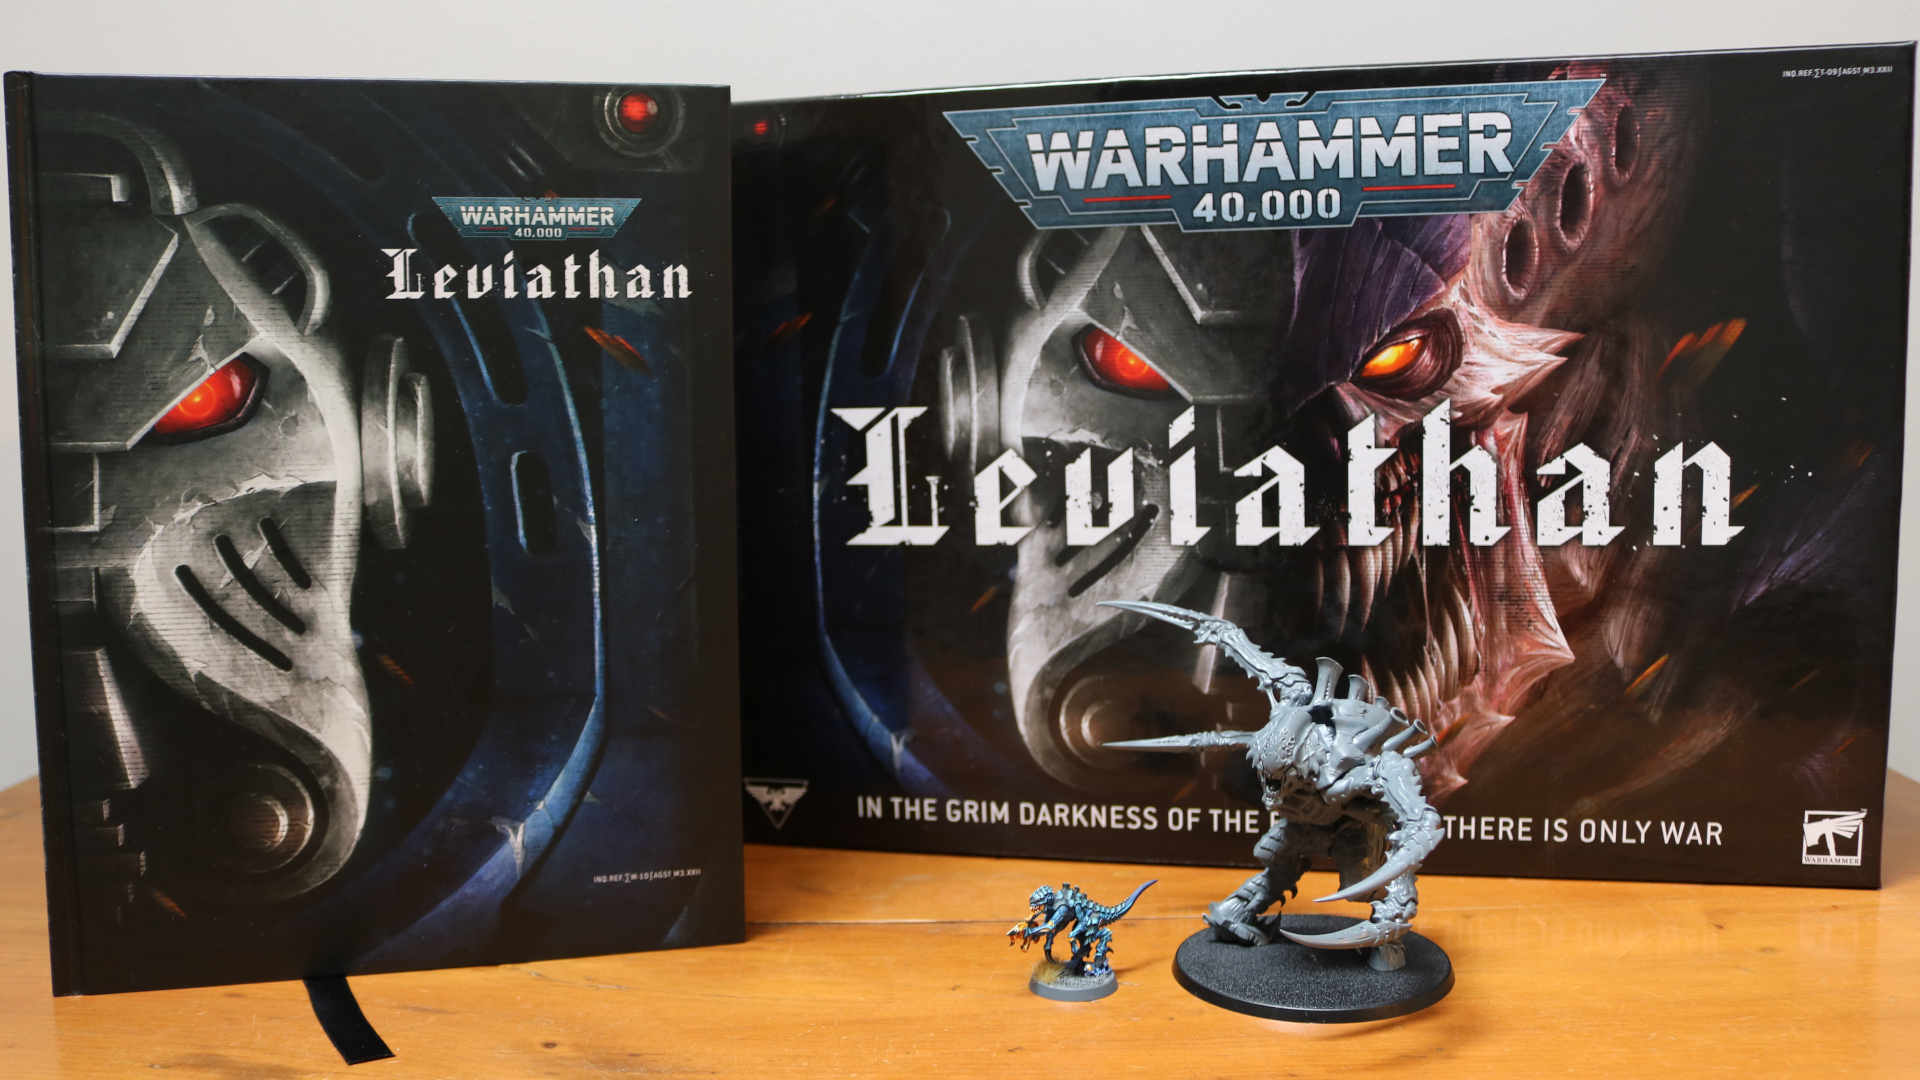 Warhammer 40K: Leviathan sold out online, customers told to buy